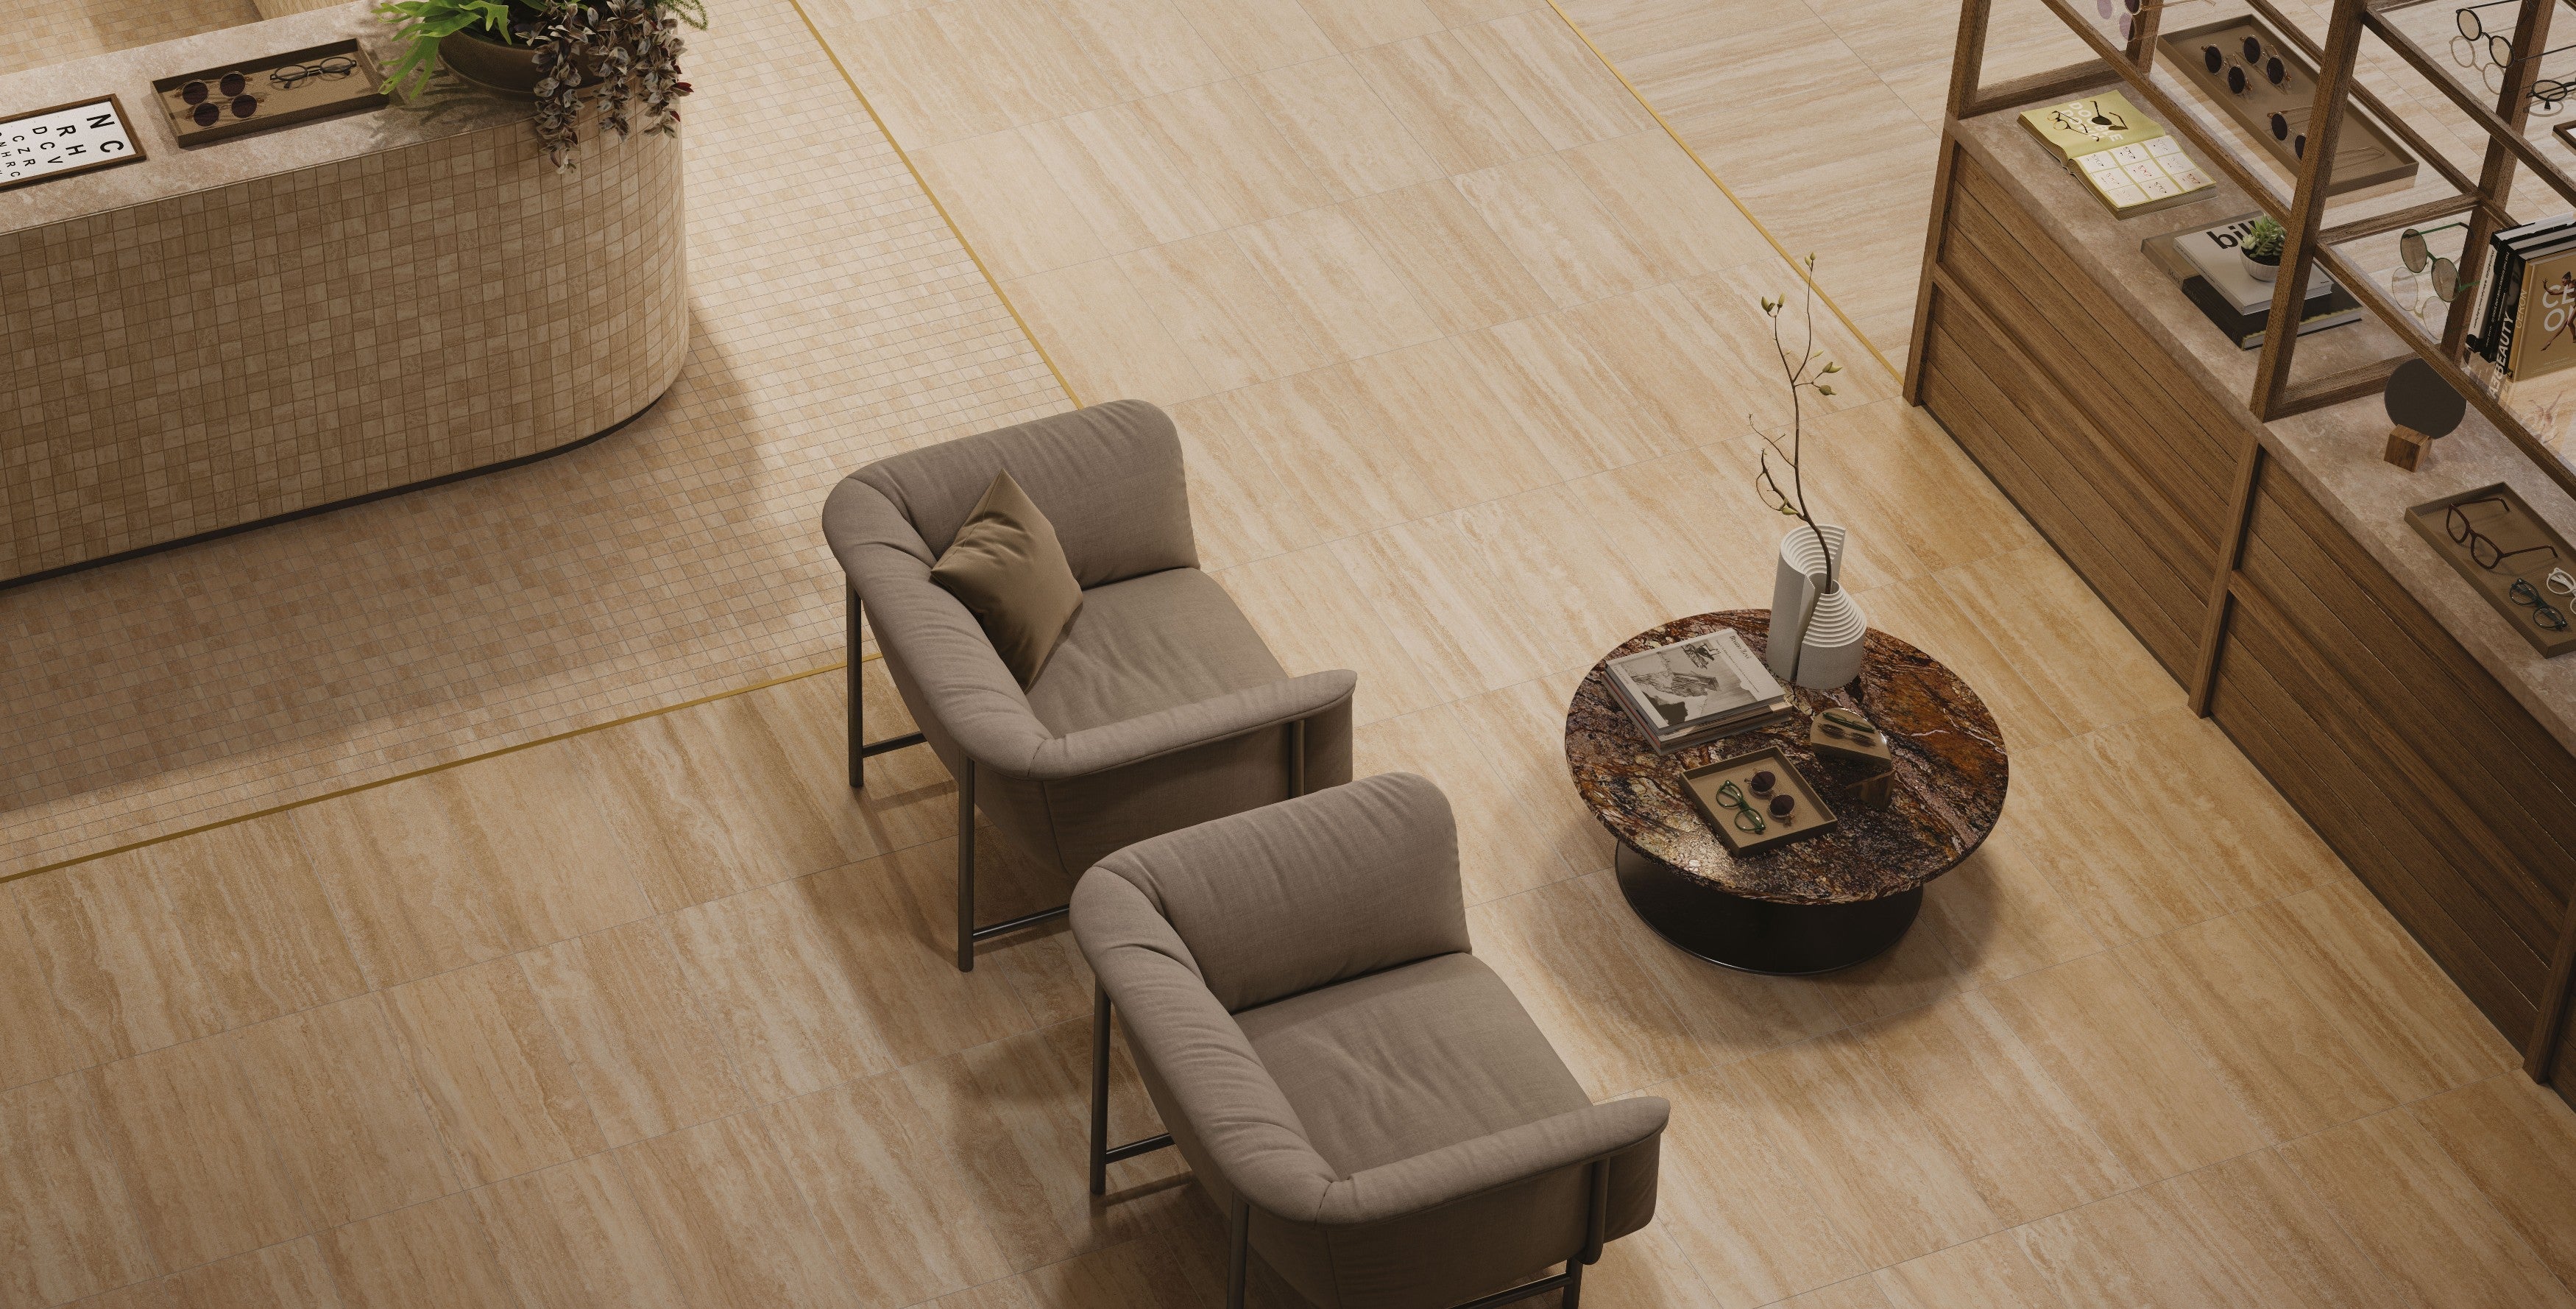 Porcelain tile collection from Surface Group showcasing Pisa series in a modern living room setting with elegant furniture and decor.